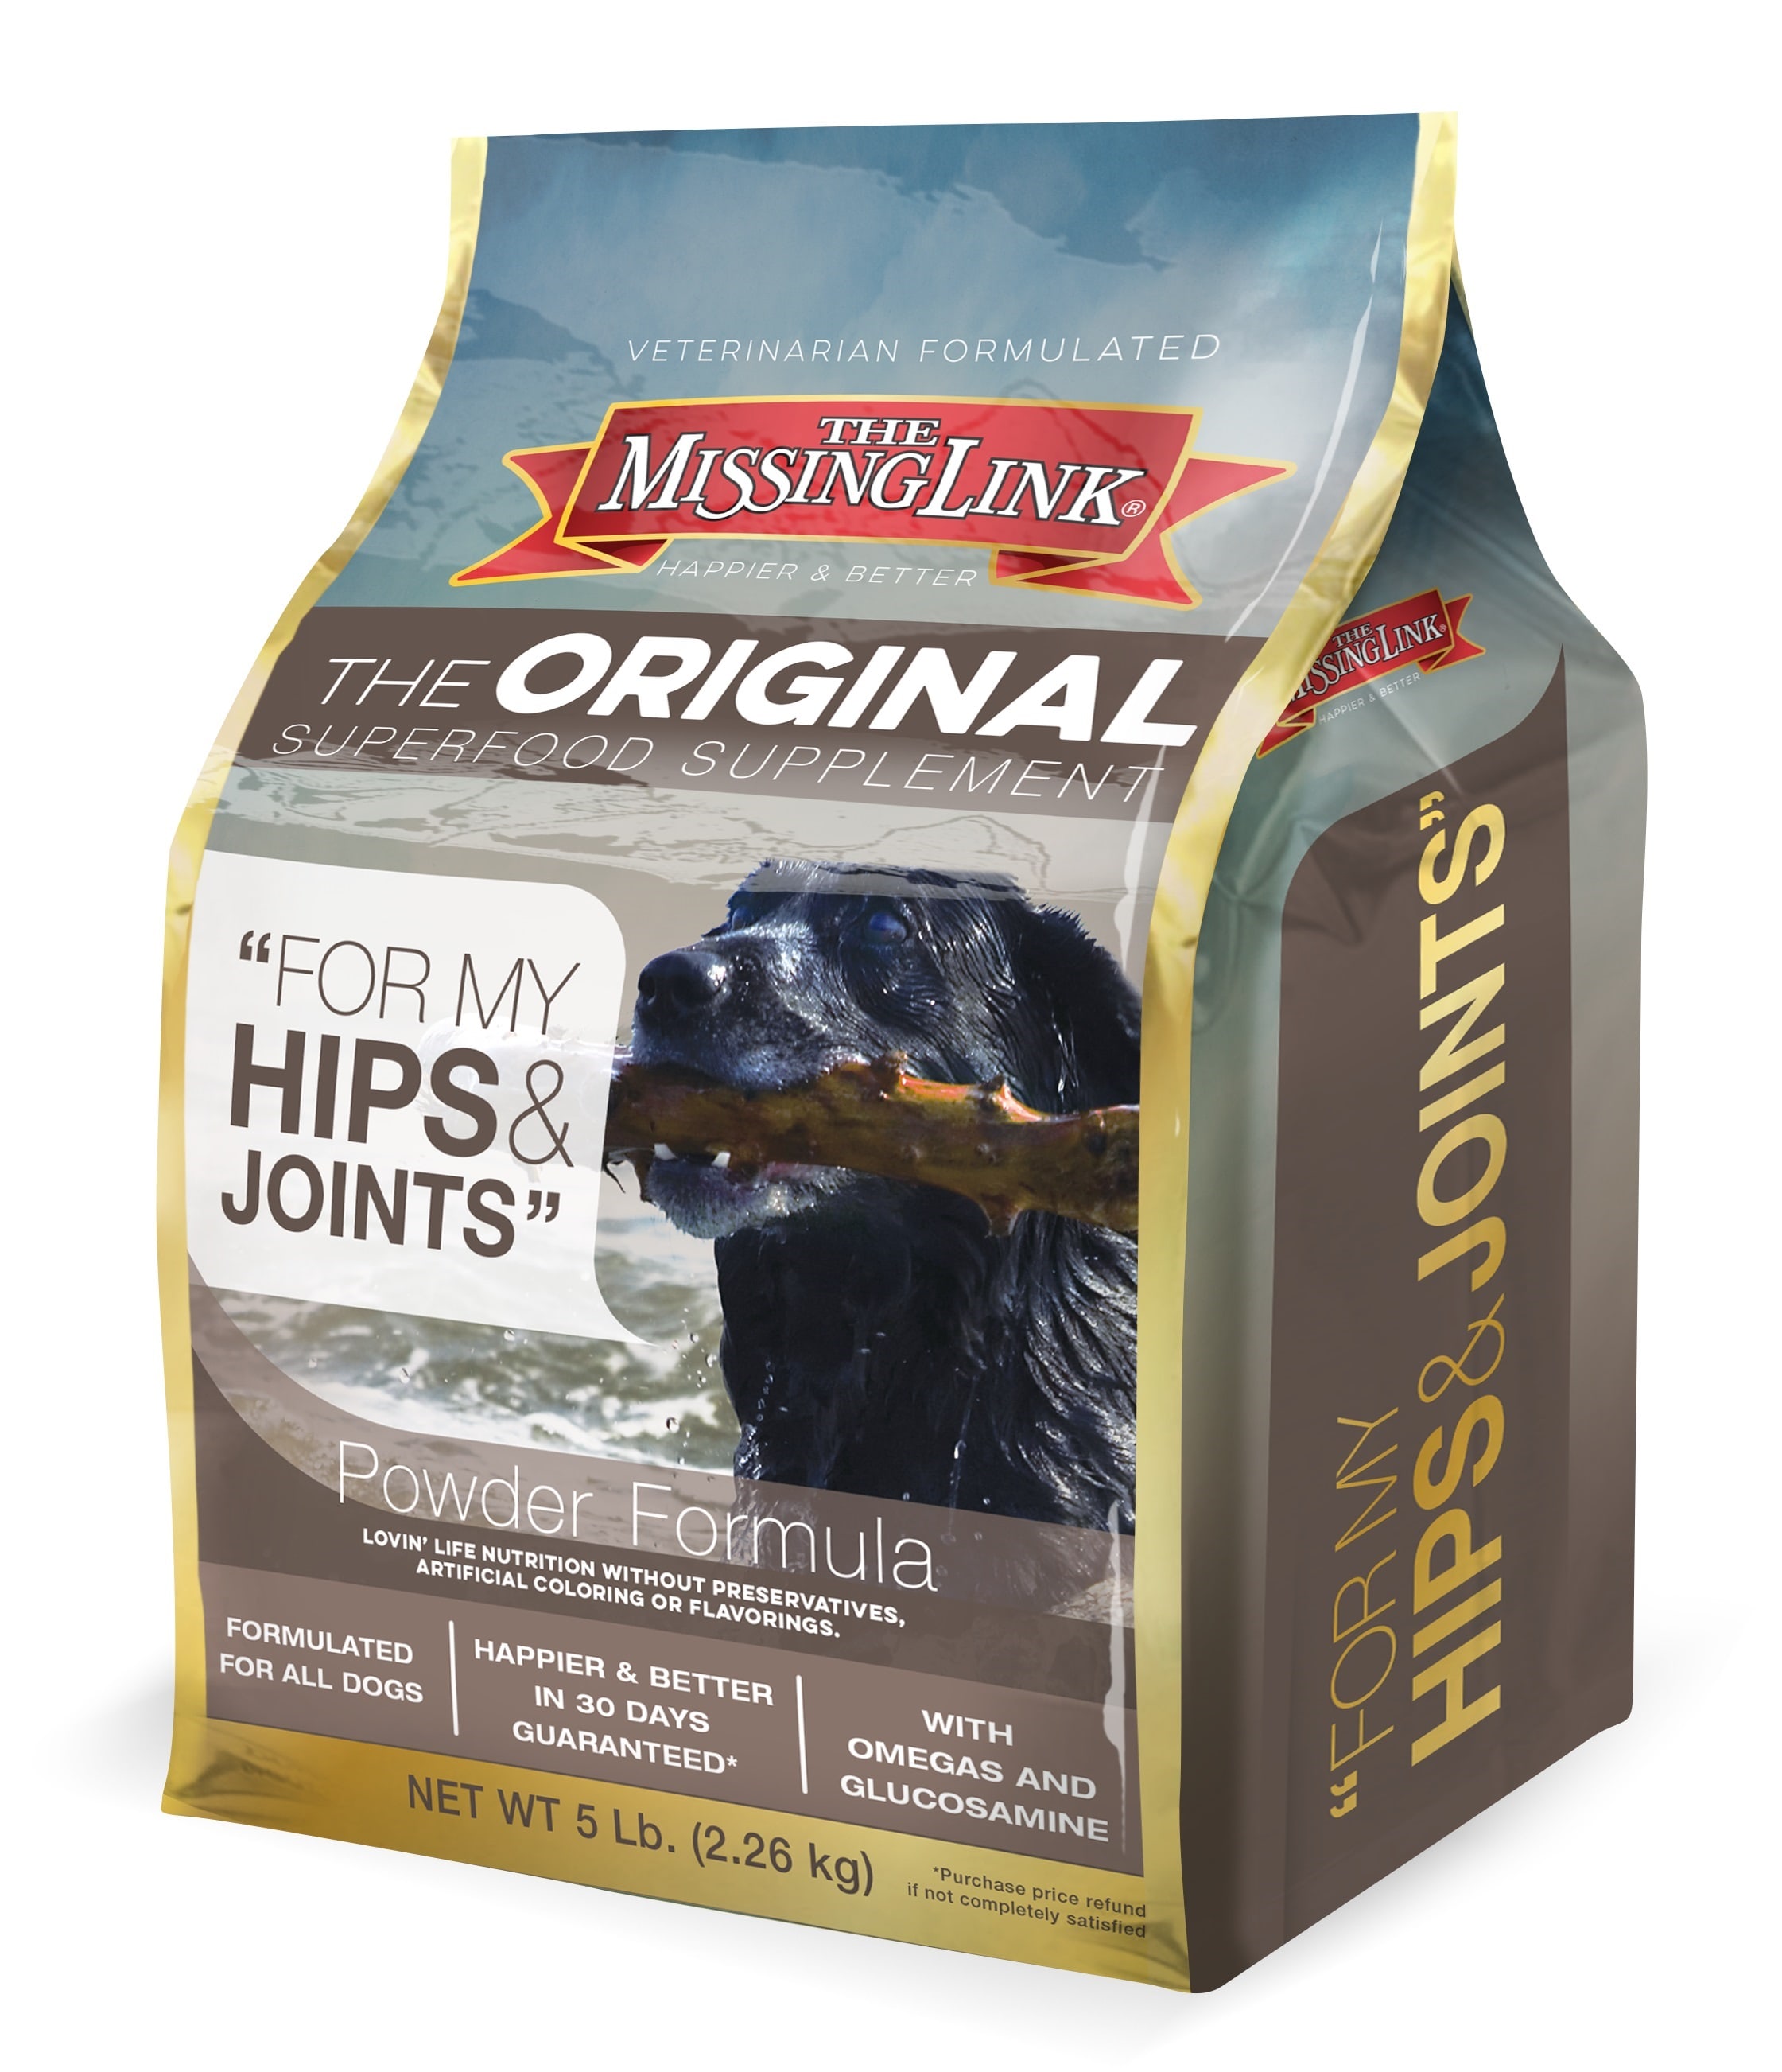 the missing link hip and joint